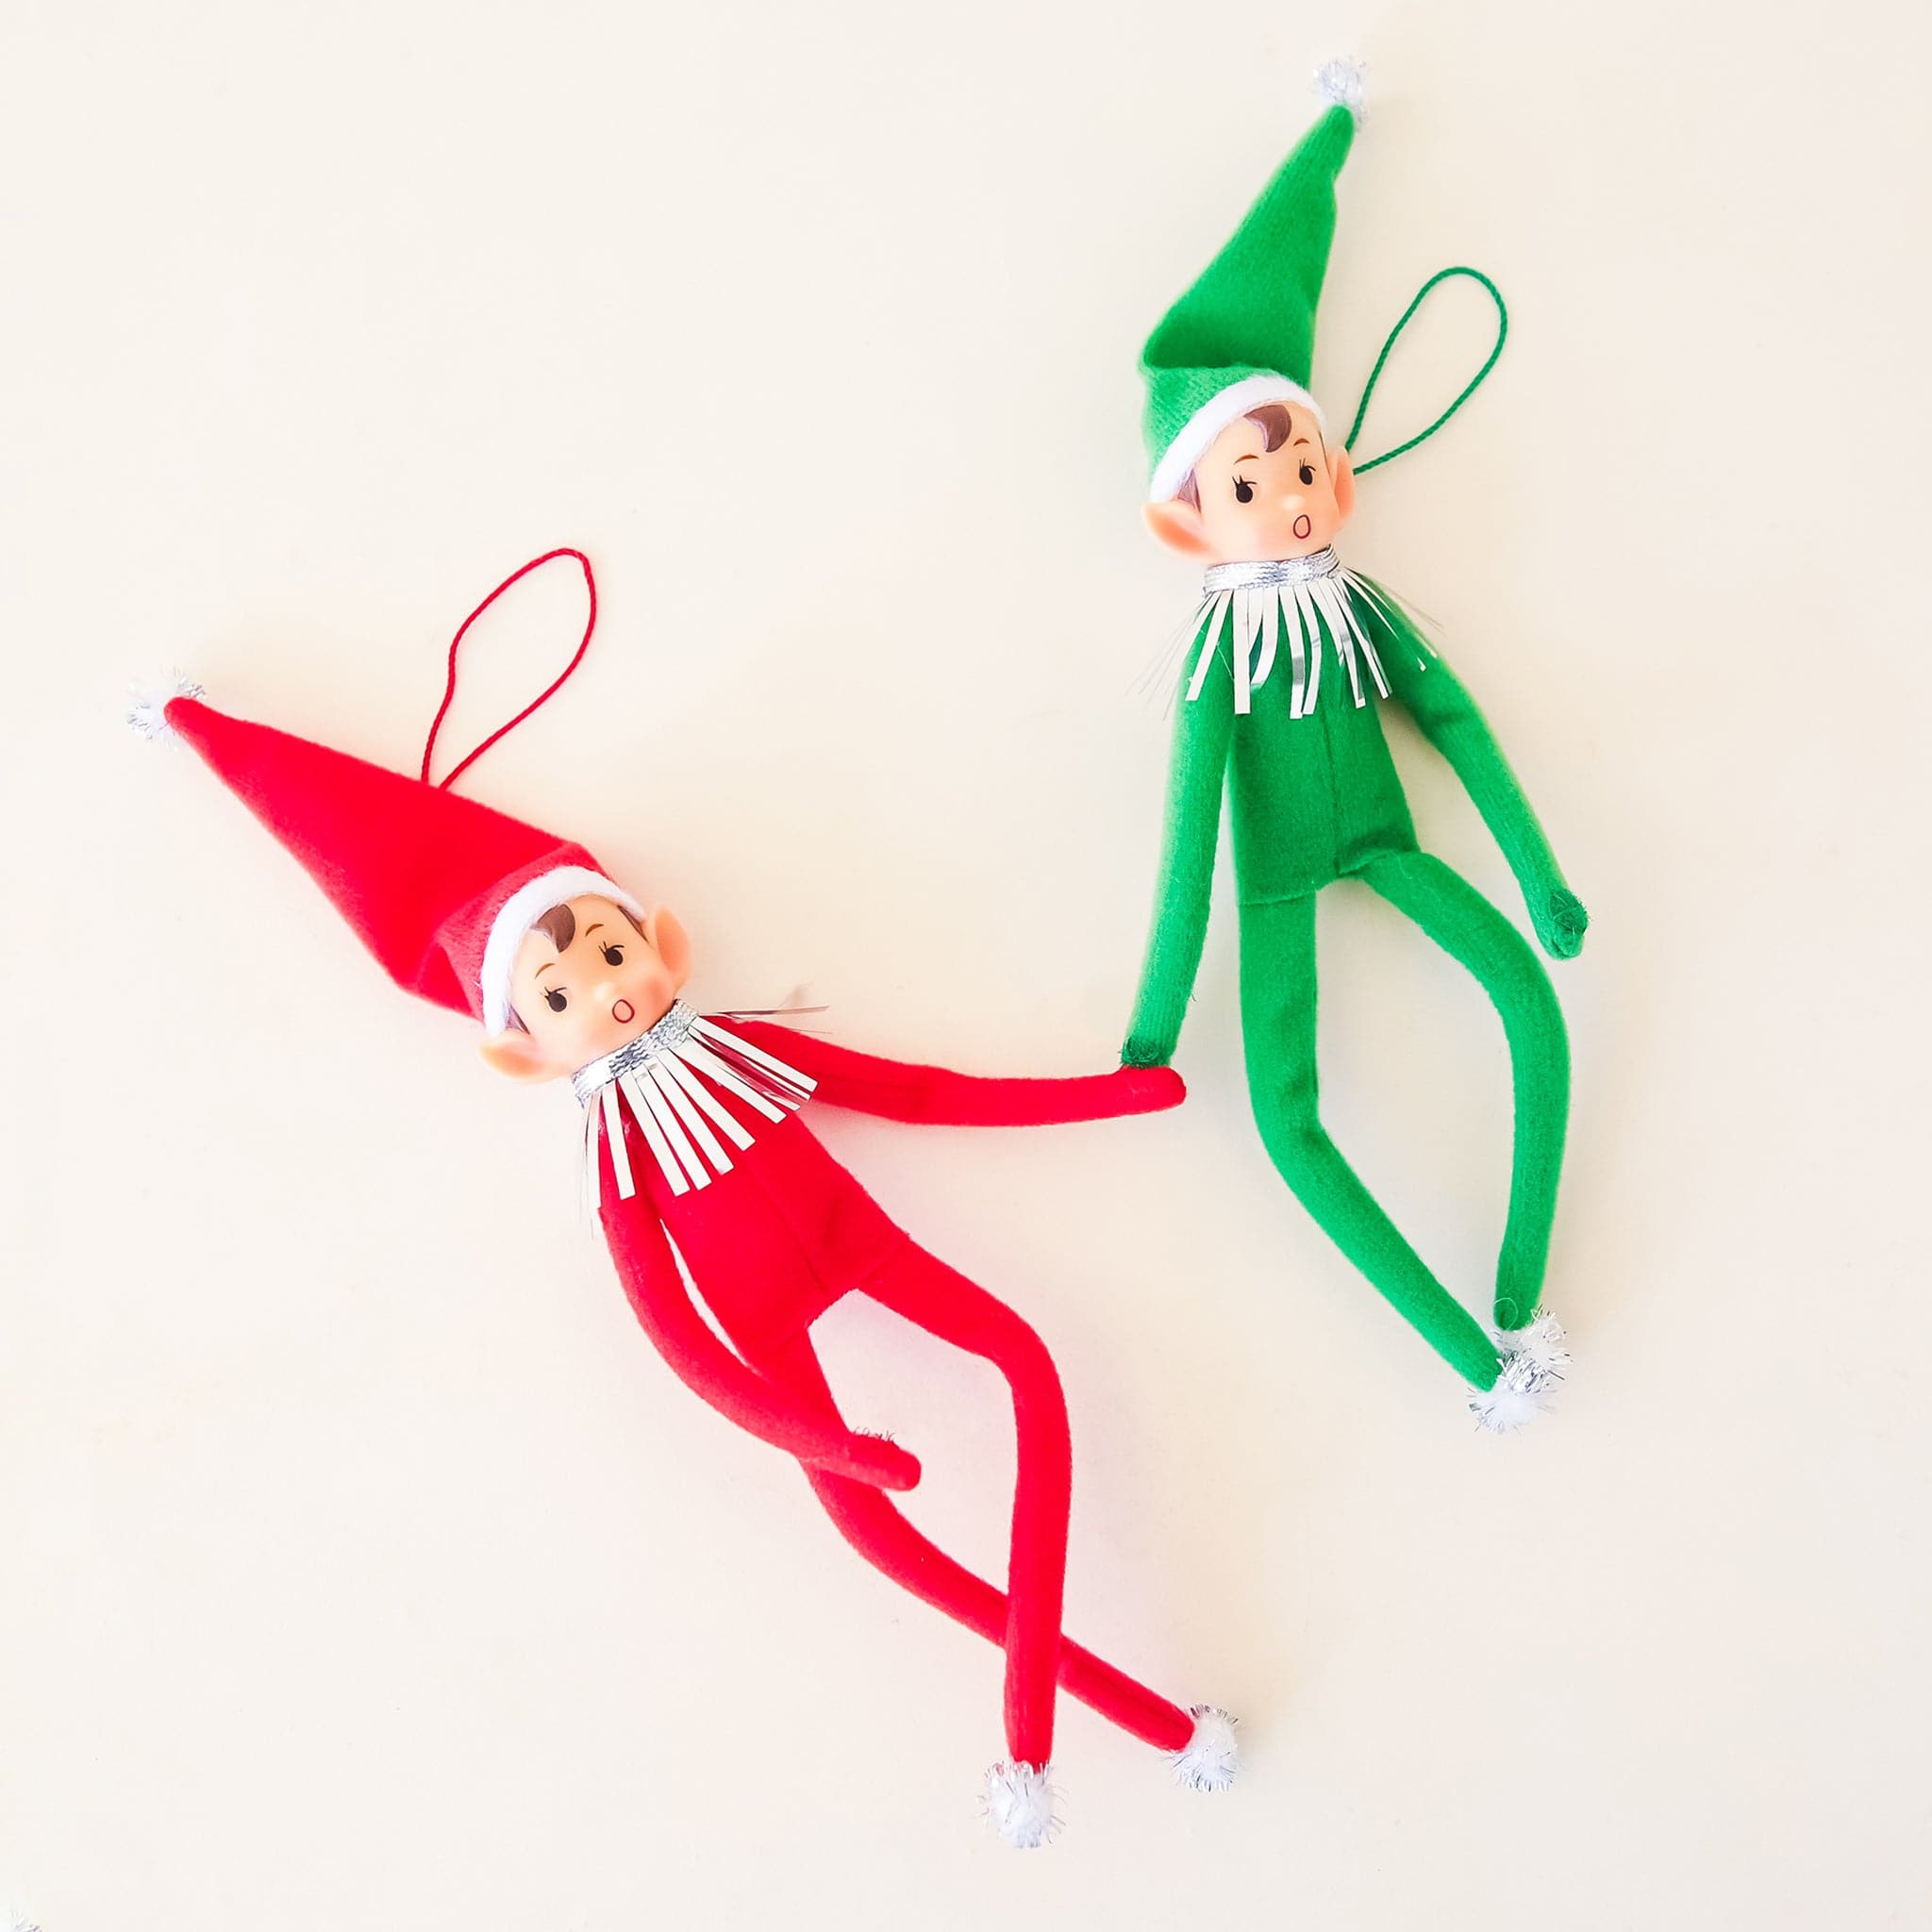 On a cream background is a red elf ornament with long limbs and a tall hat as well as the green version right next to it. 